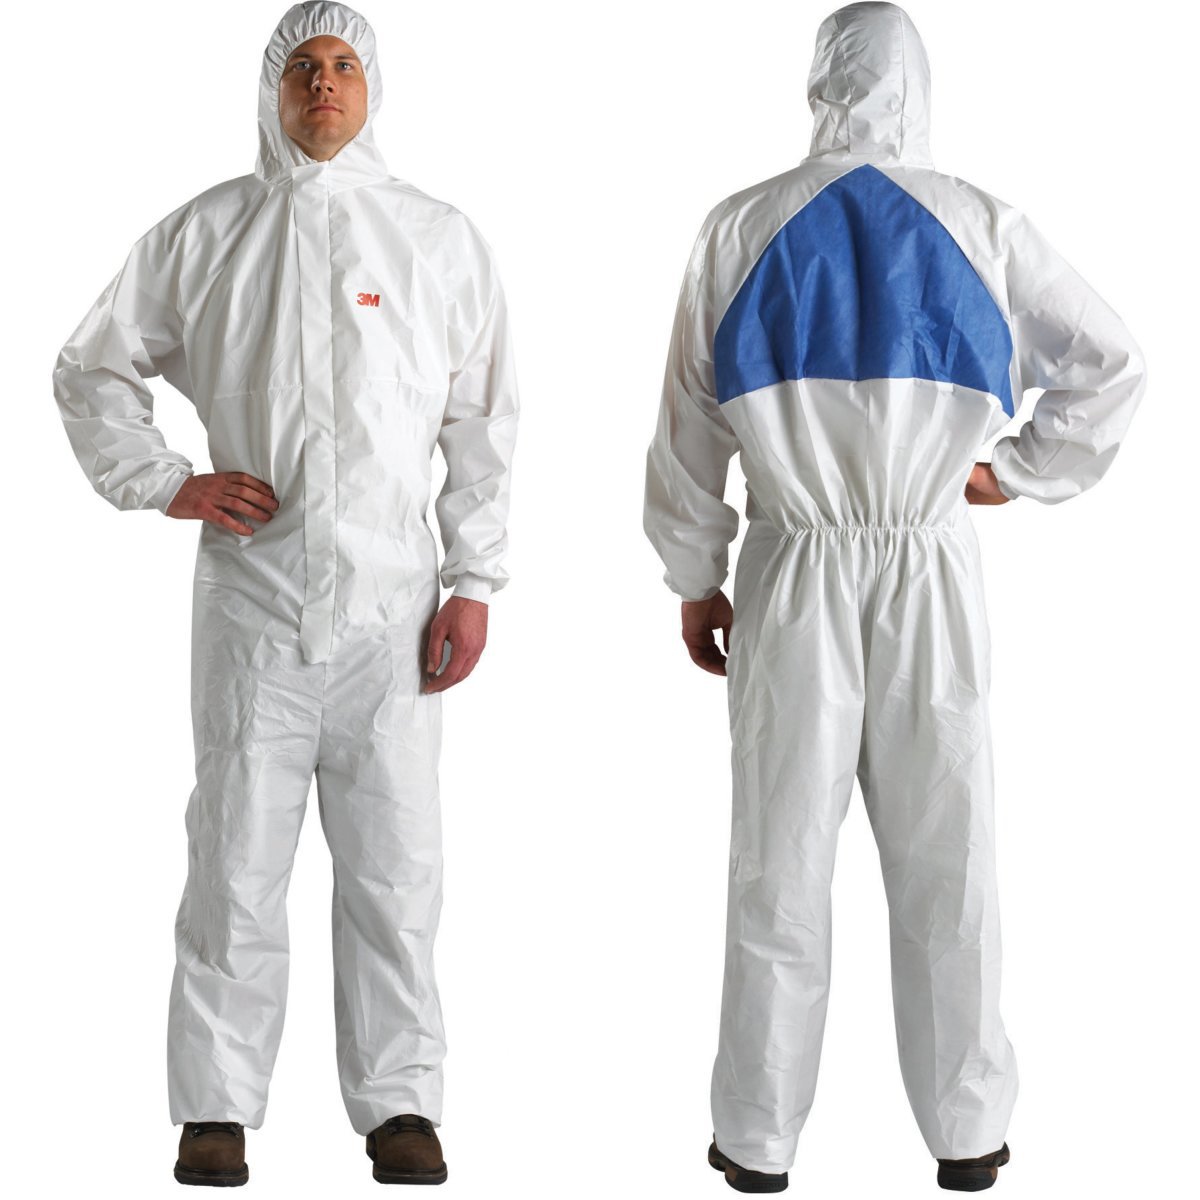 3M™ Disposable Protective Coverall 4540+ XXL White/Blue MIV Type 5/6 (Availability restrictions apply.)